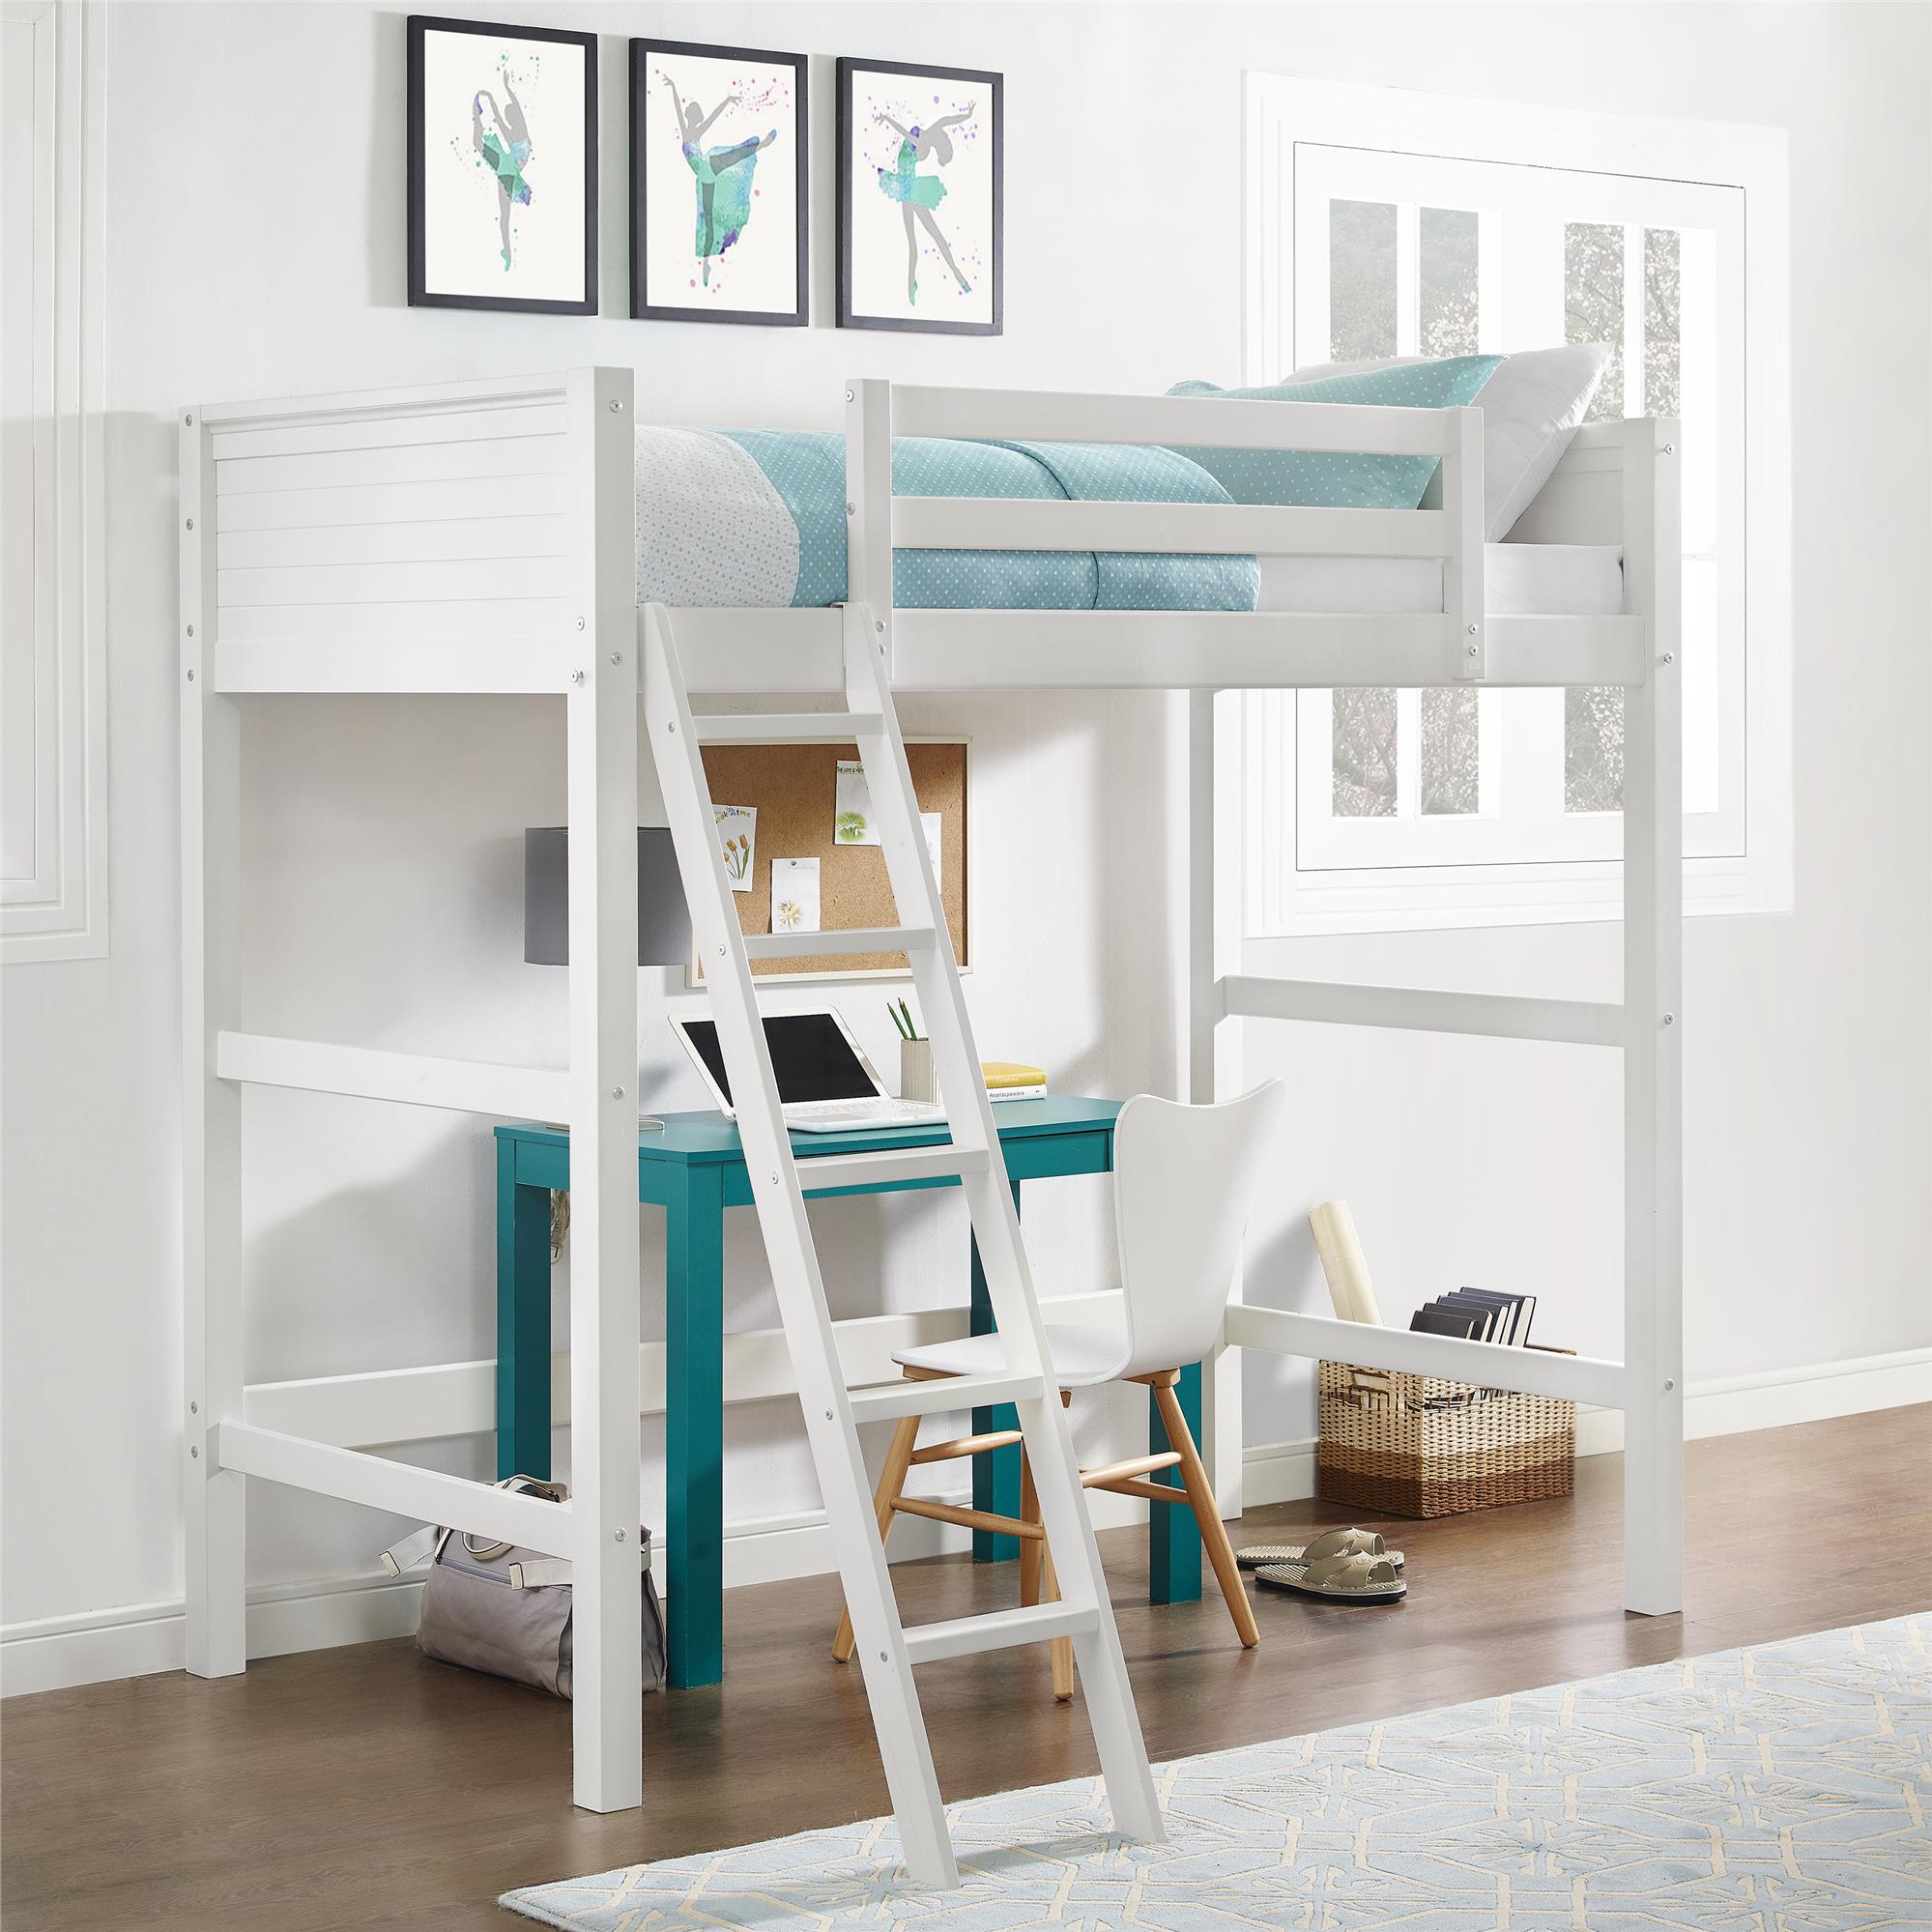 Your Zone Kiarah Twin Loft Bed with Ladder, White - image 1 of 18